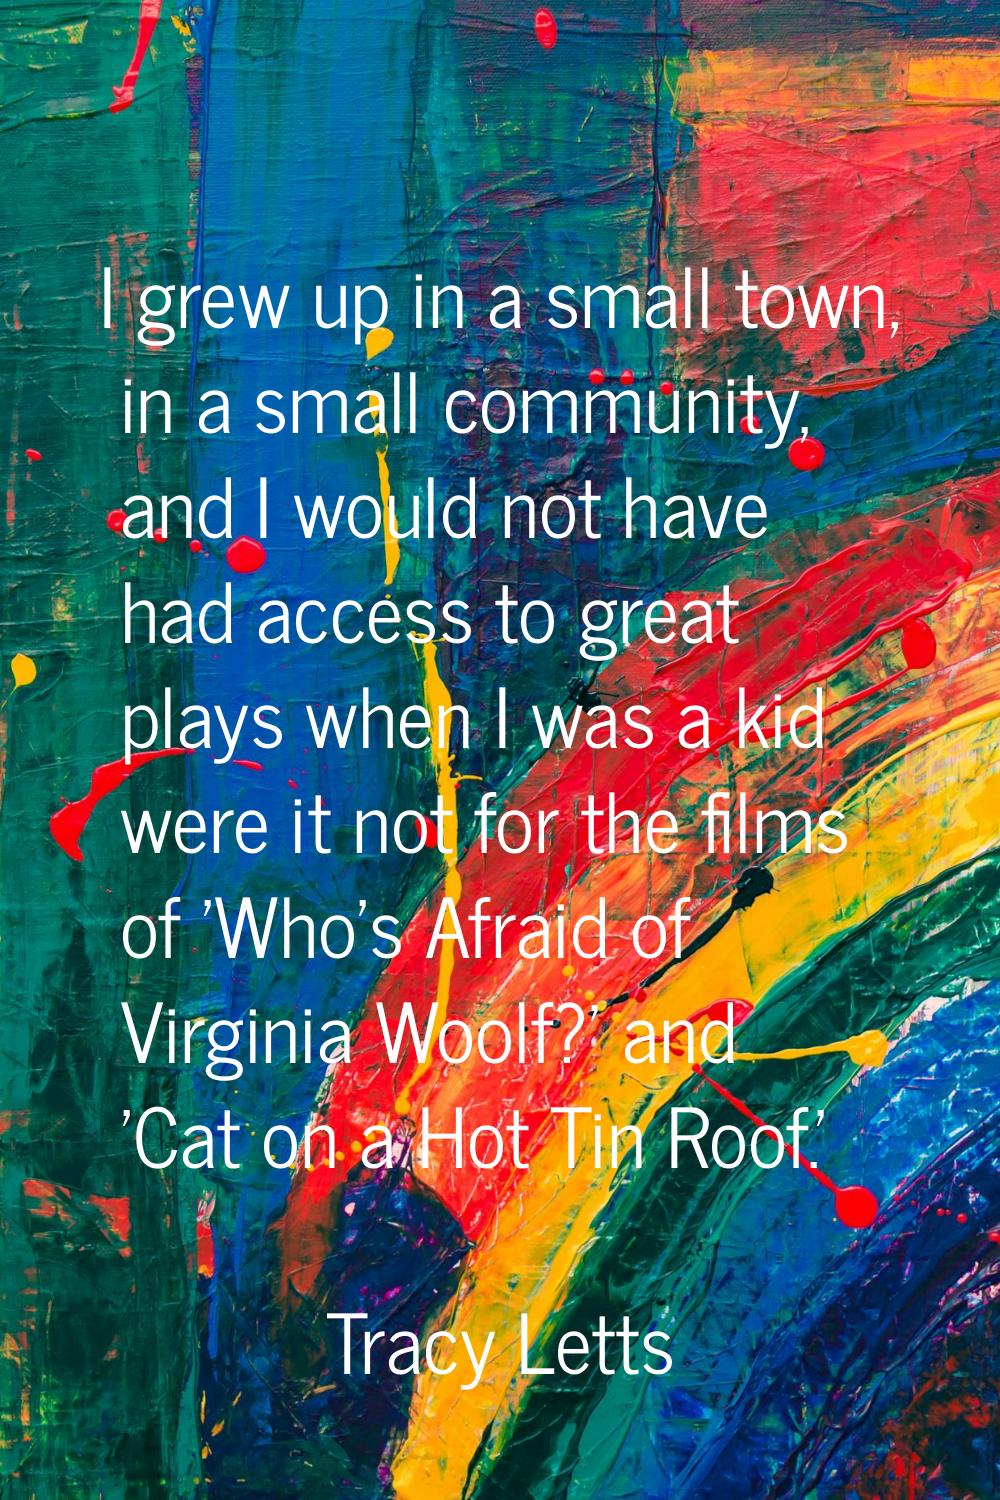 I grew up in a small town, in a small community, and I would not have had access to great plays whe